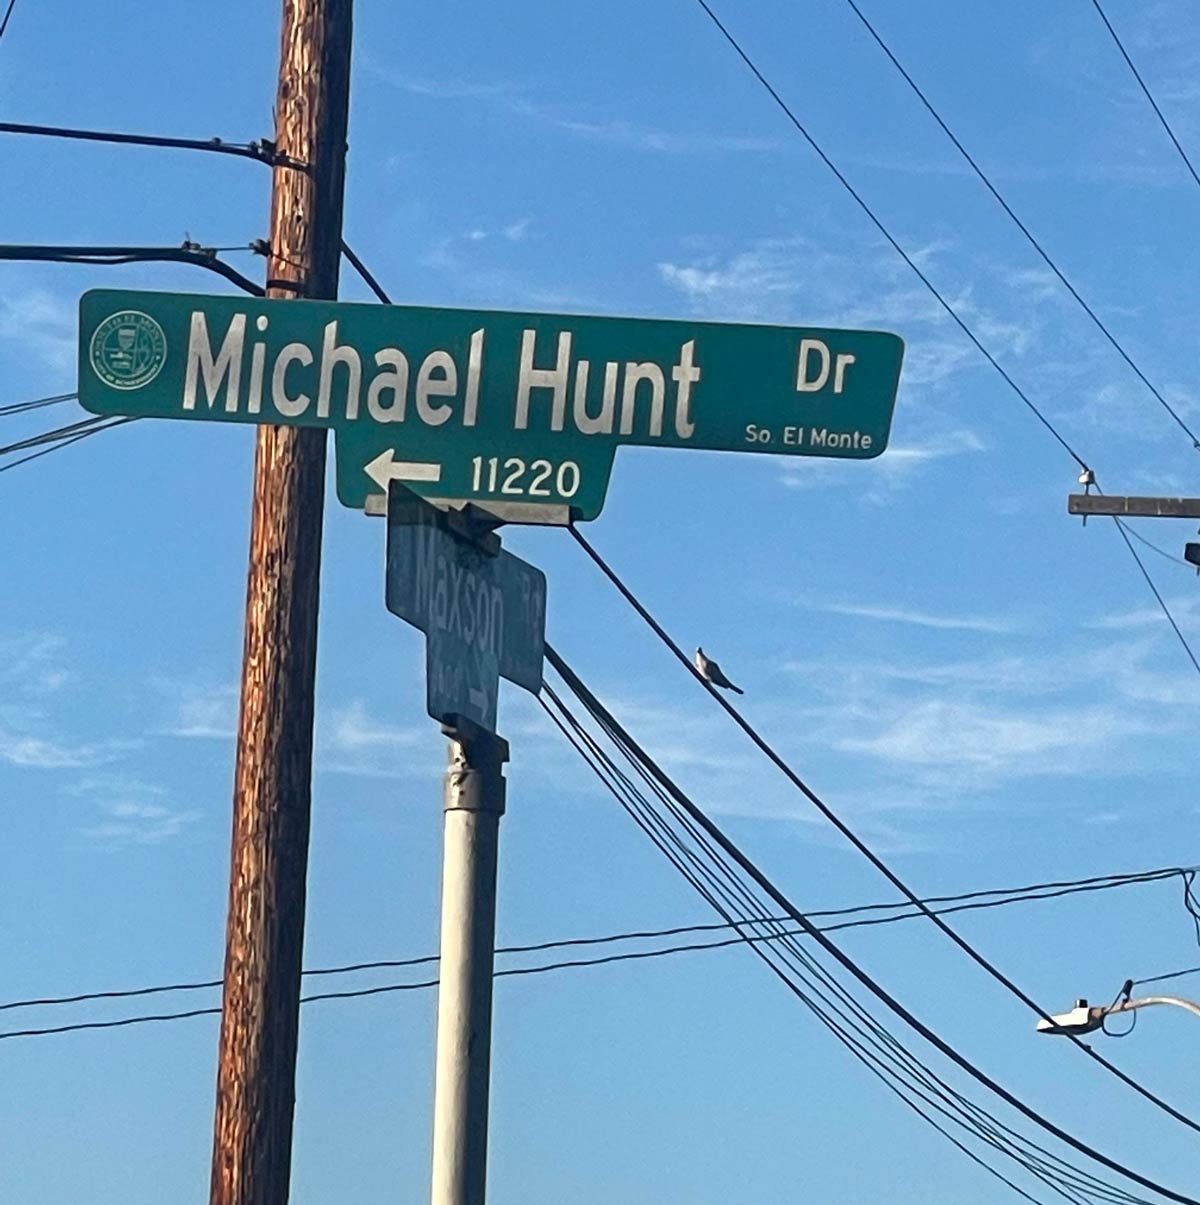 Glad they didn’t go with “Mike”